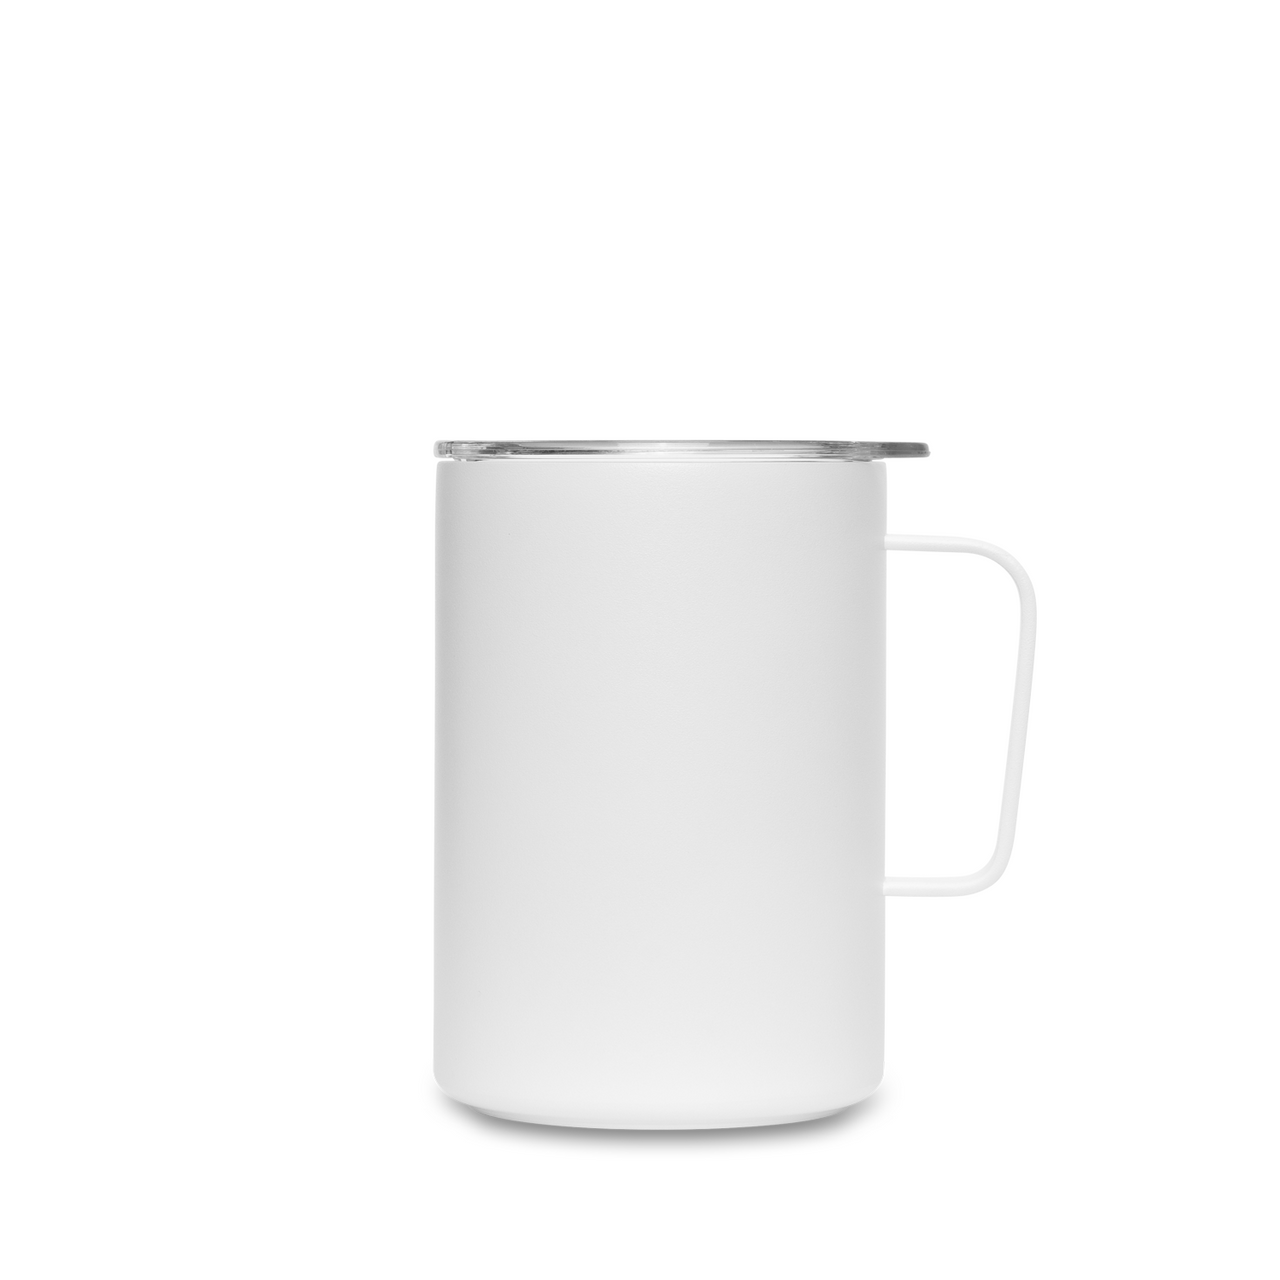 https://cdn11.bigcommerce.com/s-afj0w/images/stencil/1280x1280/products/410/4094/Camp_Cup_16oz_White_Right__10707.1658513075.png?c=2